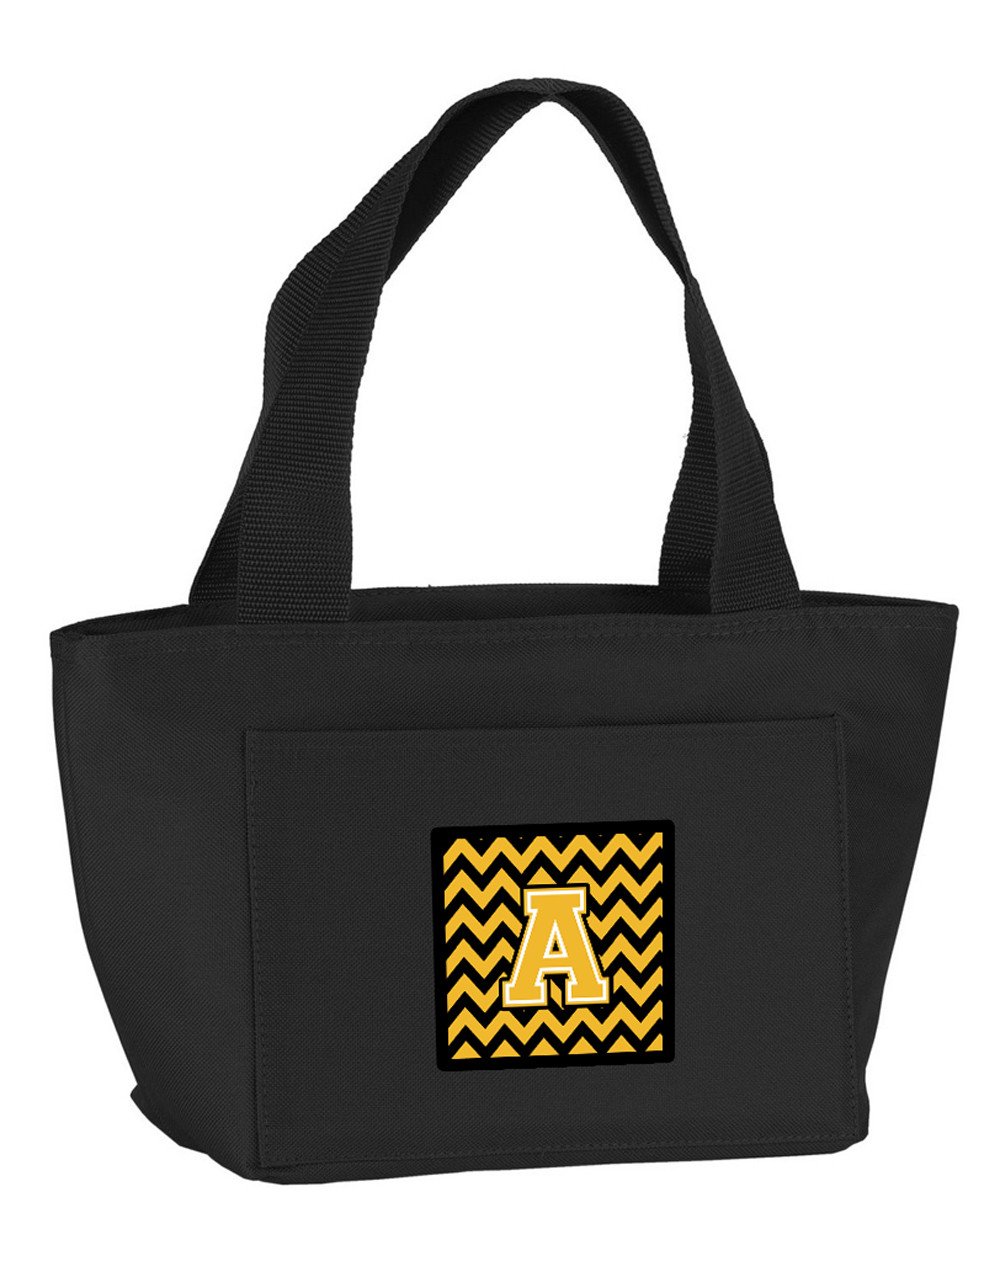 Letter A Chevron Black and Gold Lunch Bag CJ1053-ABK-8808 by Caroline's Treasures